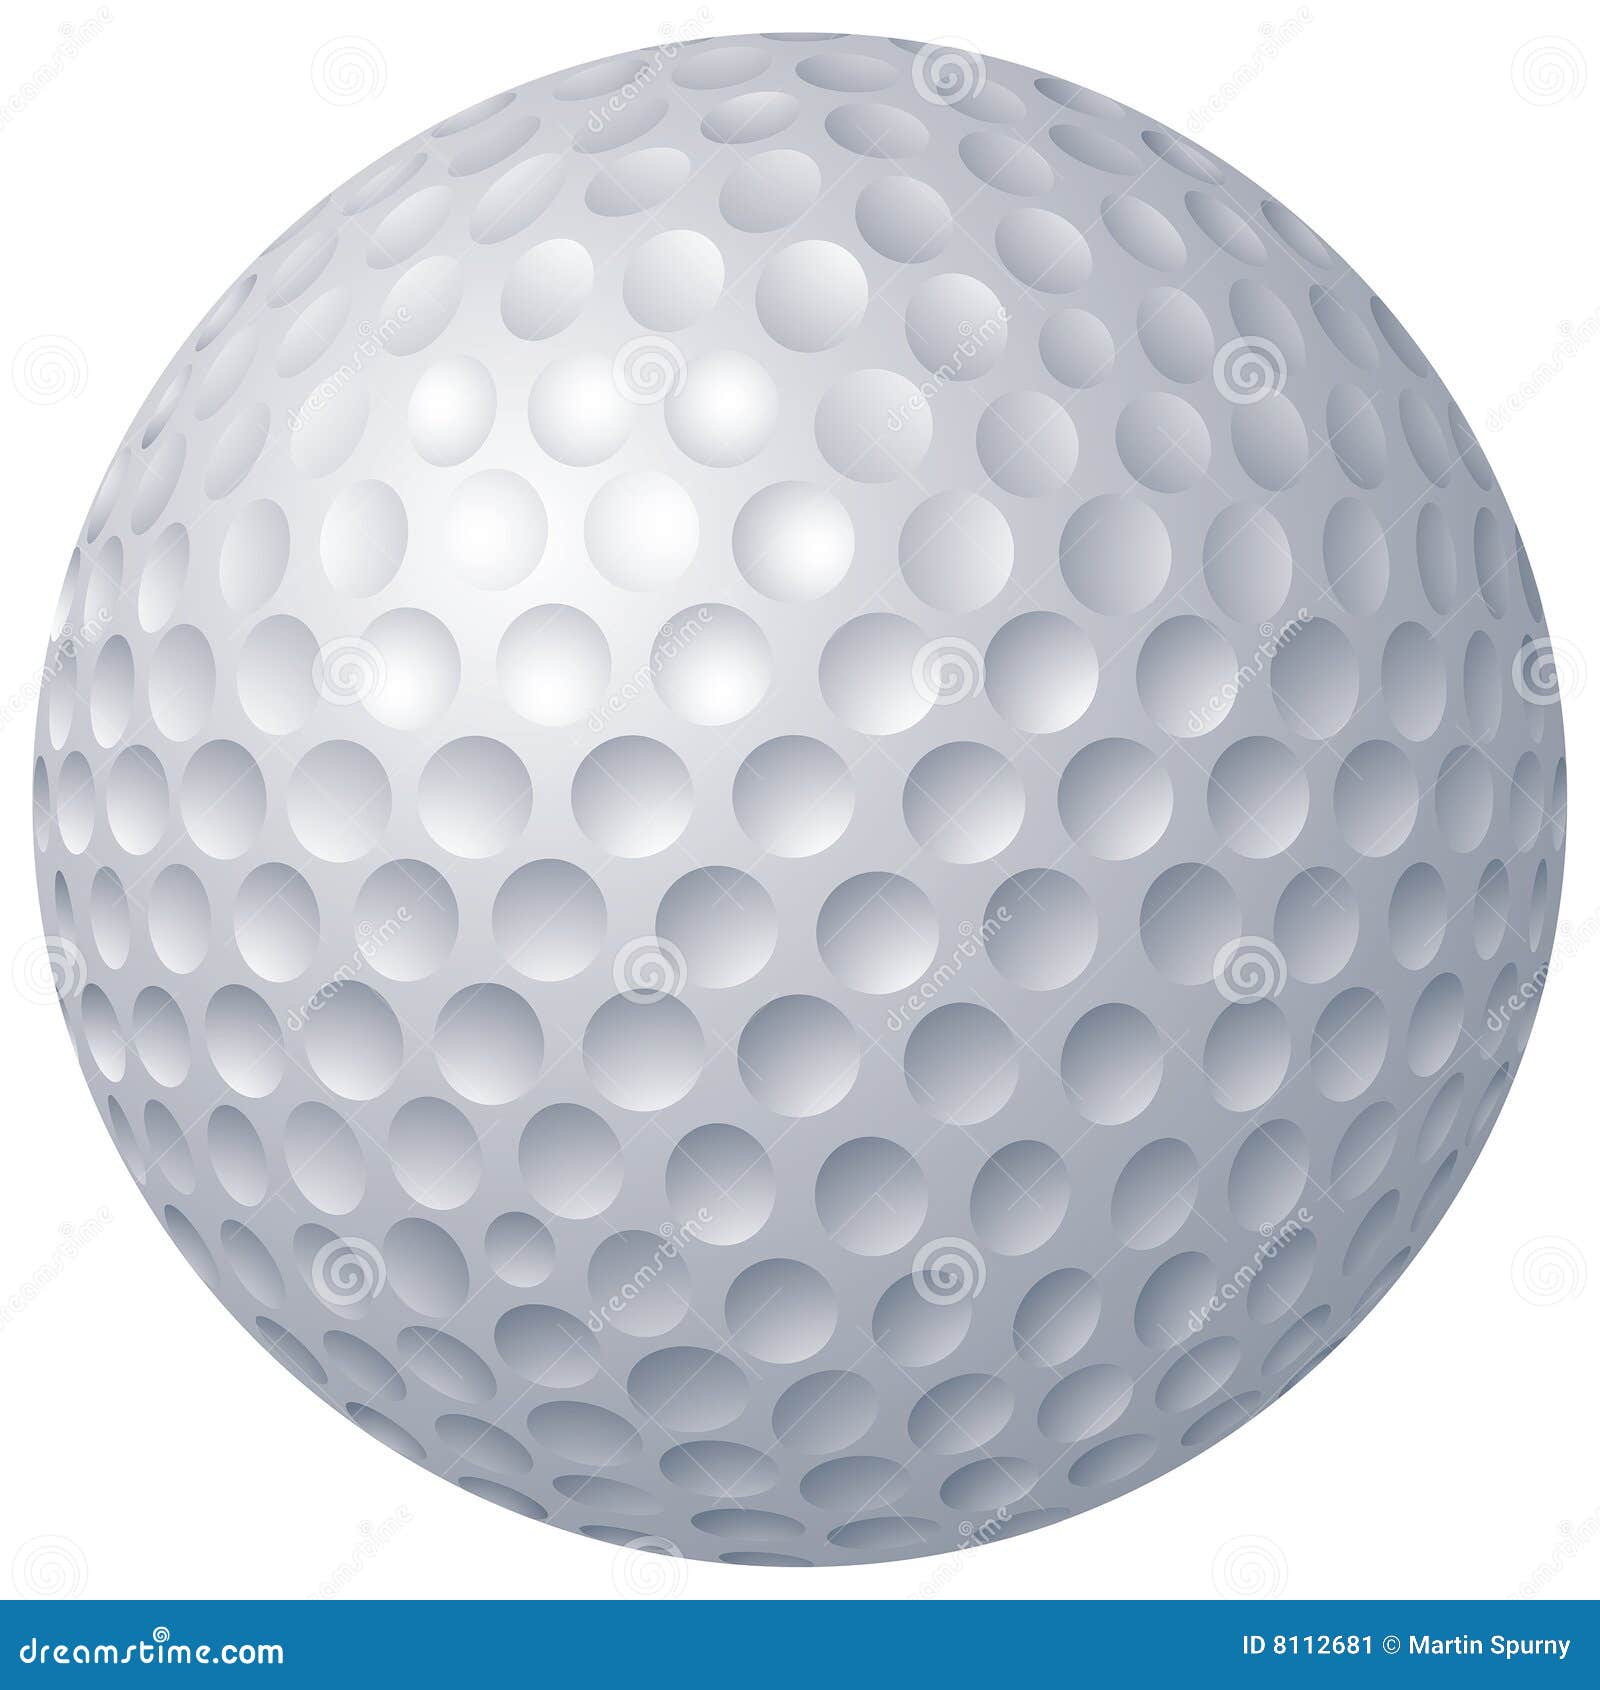 golf ball pictures clip art - photo #41